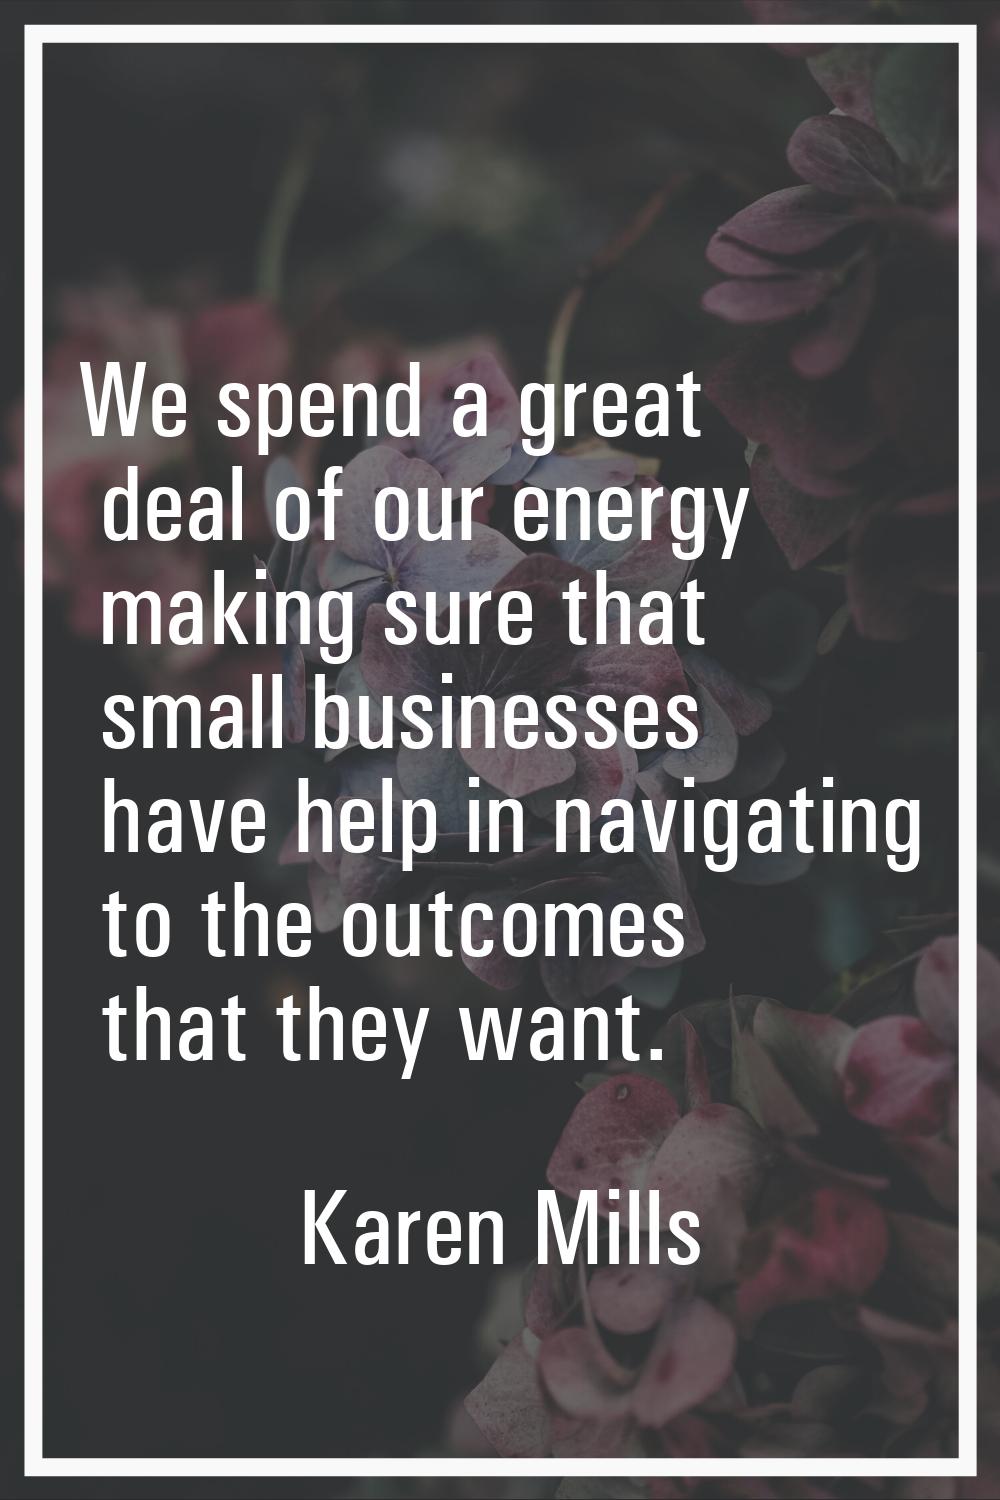 We spend a great deal of our energy making sure that small businesses have help in navigating to th